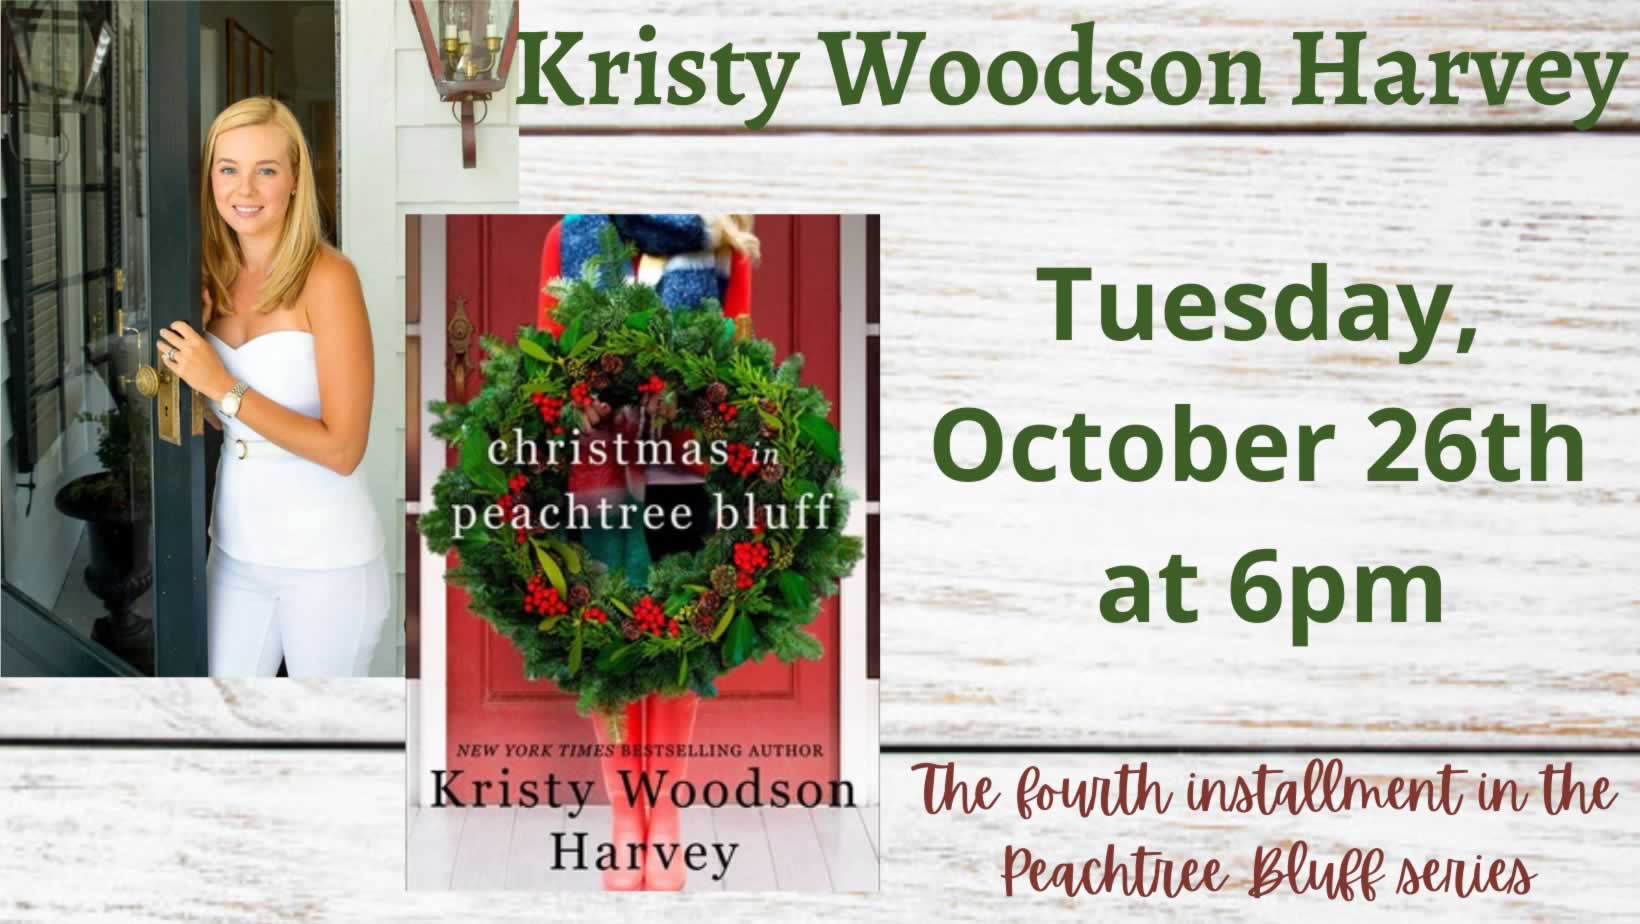 Kristy Woodson Harvey Presents Christmas In Peachtree Bluff